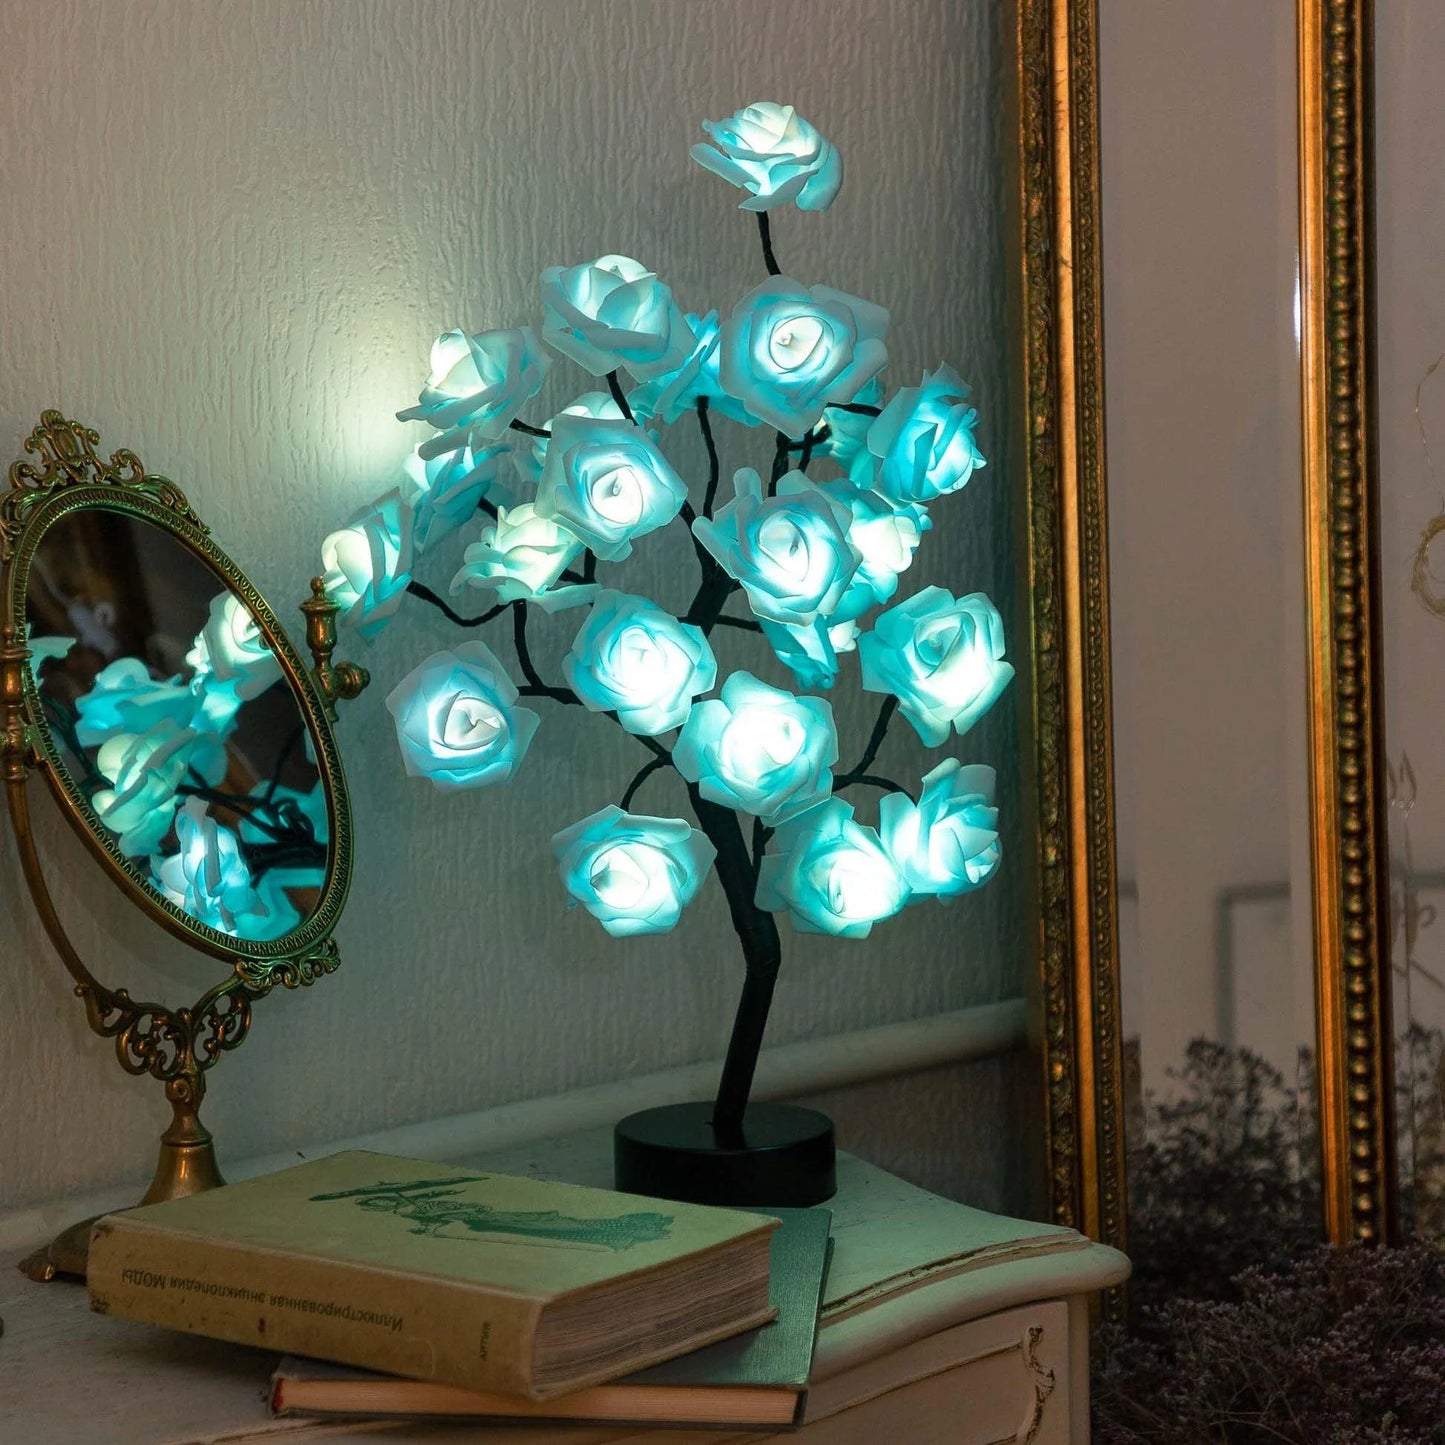 Enchanted Blossom Tree Lamp in Blue Color